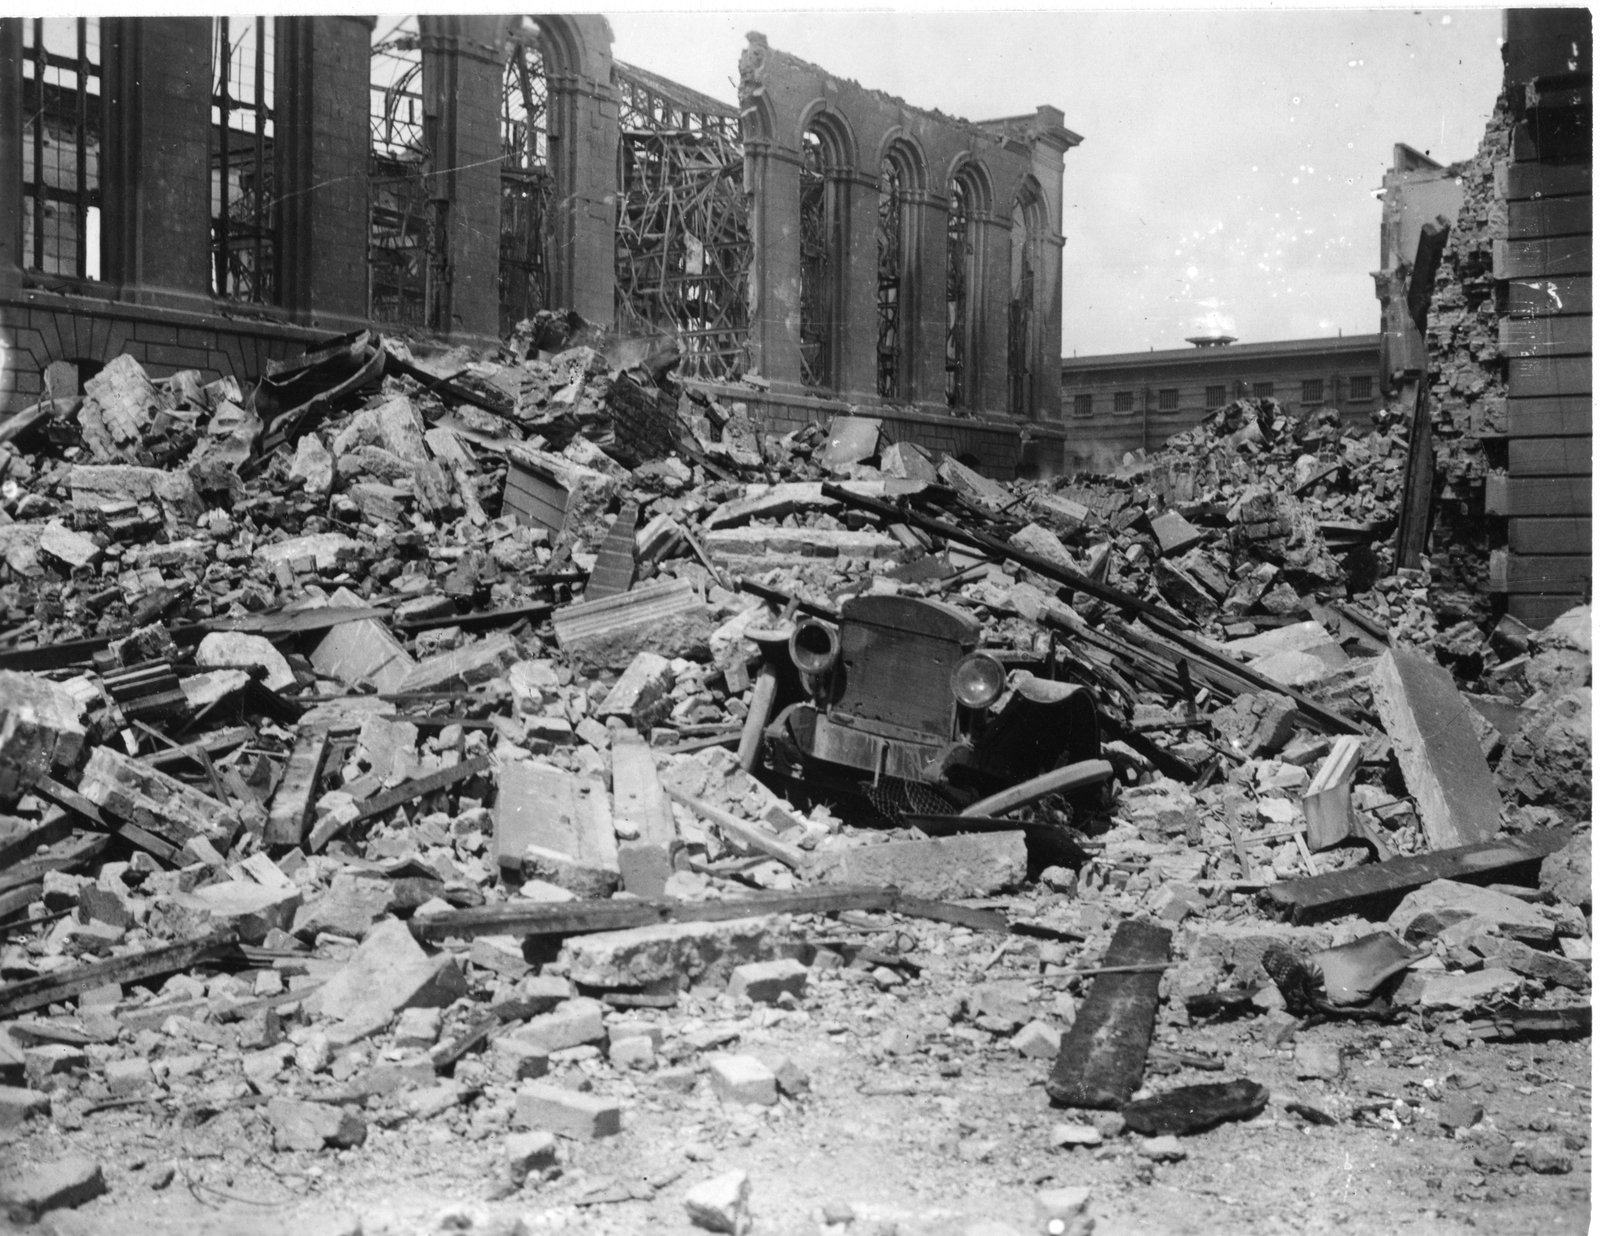 Image - The scene of the explosion, with the burnt-out Public Records Office in the background. Image courtesy of the Irish Architectural Archive